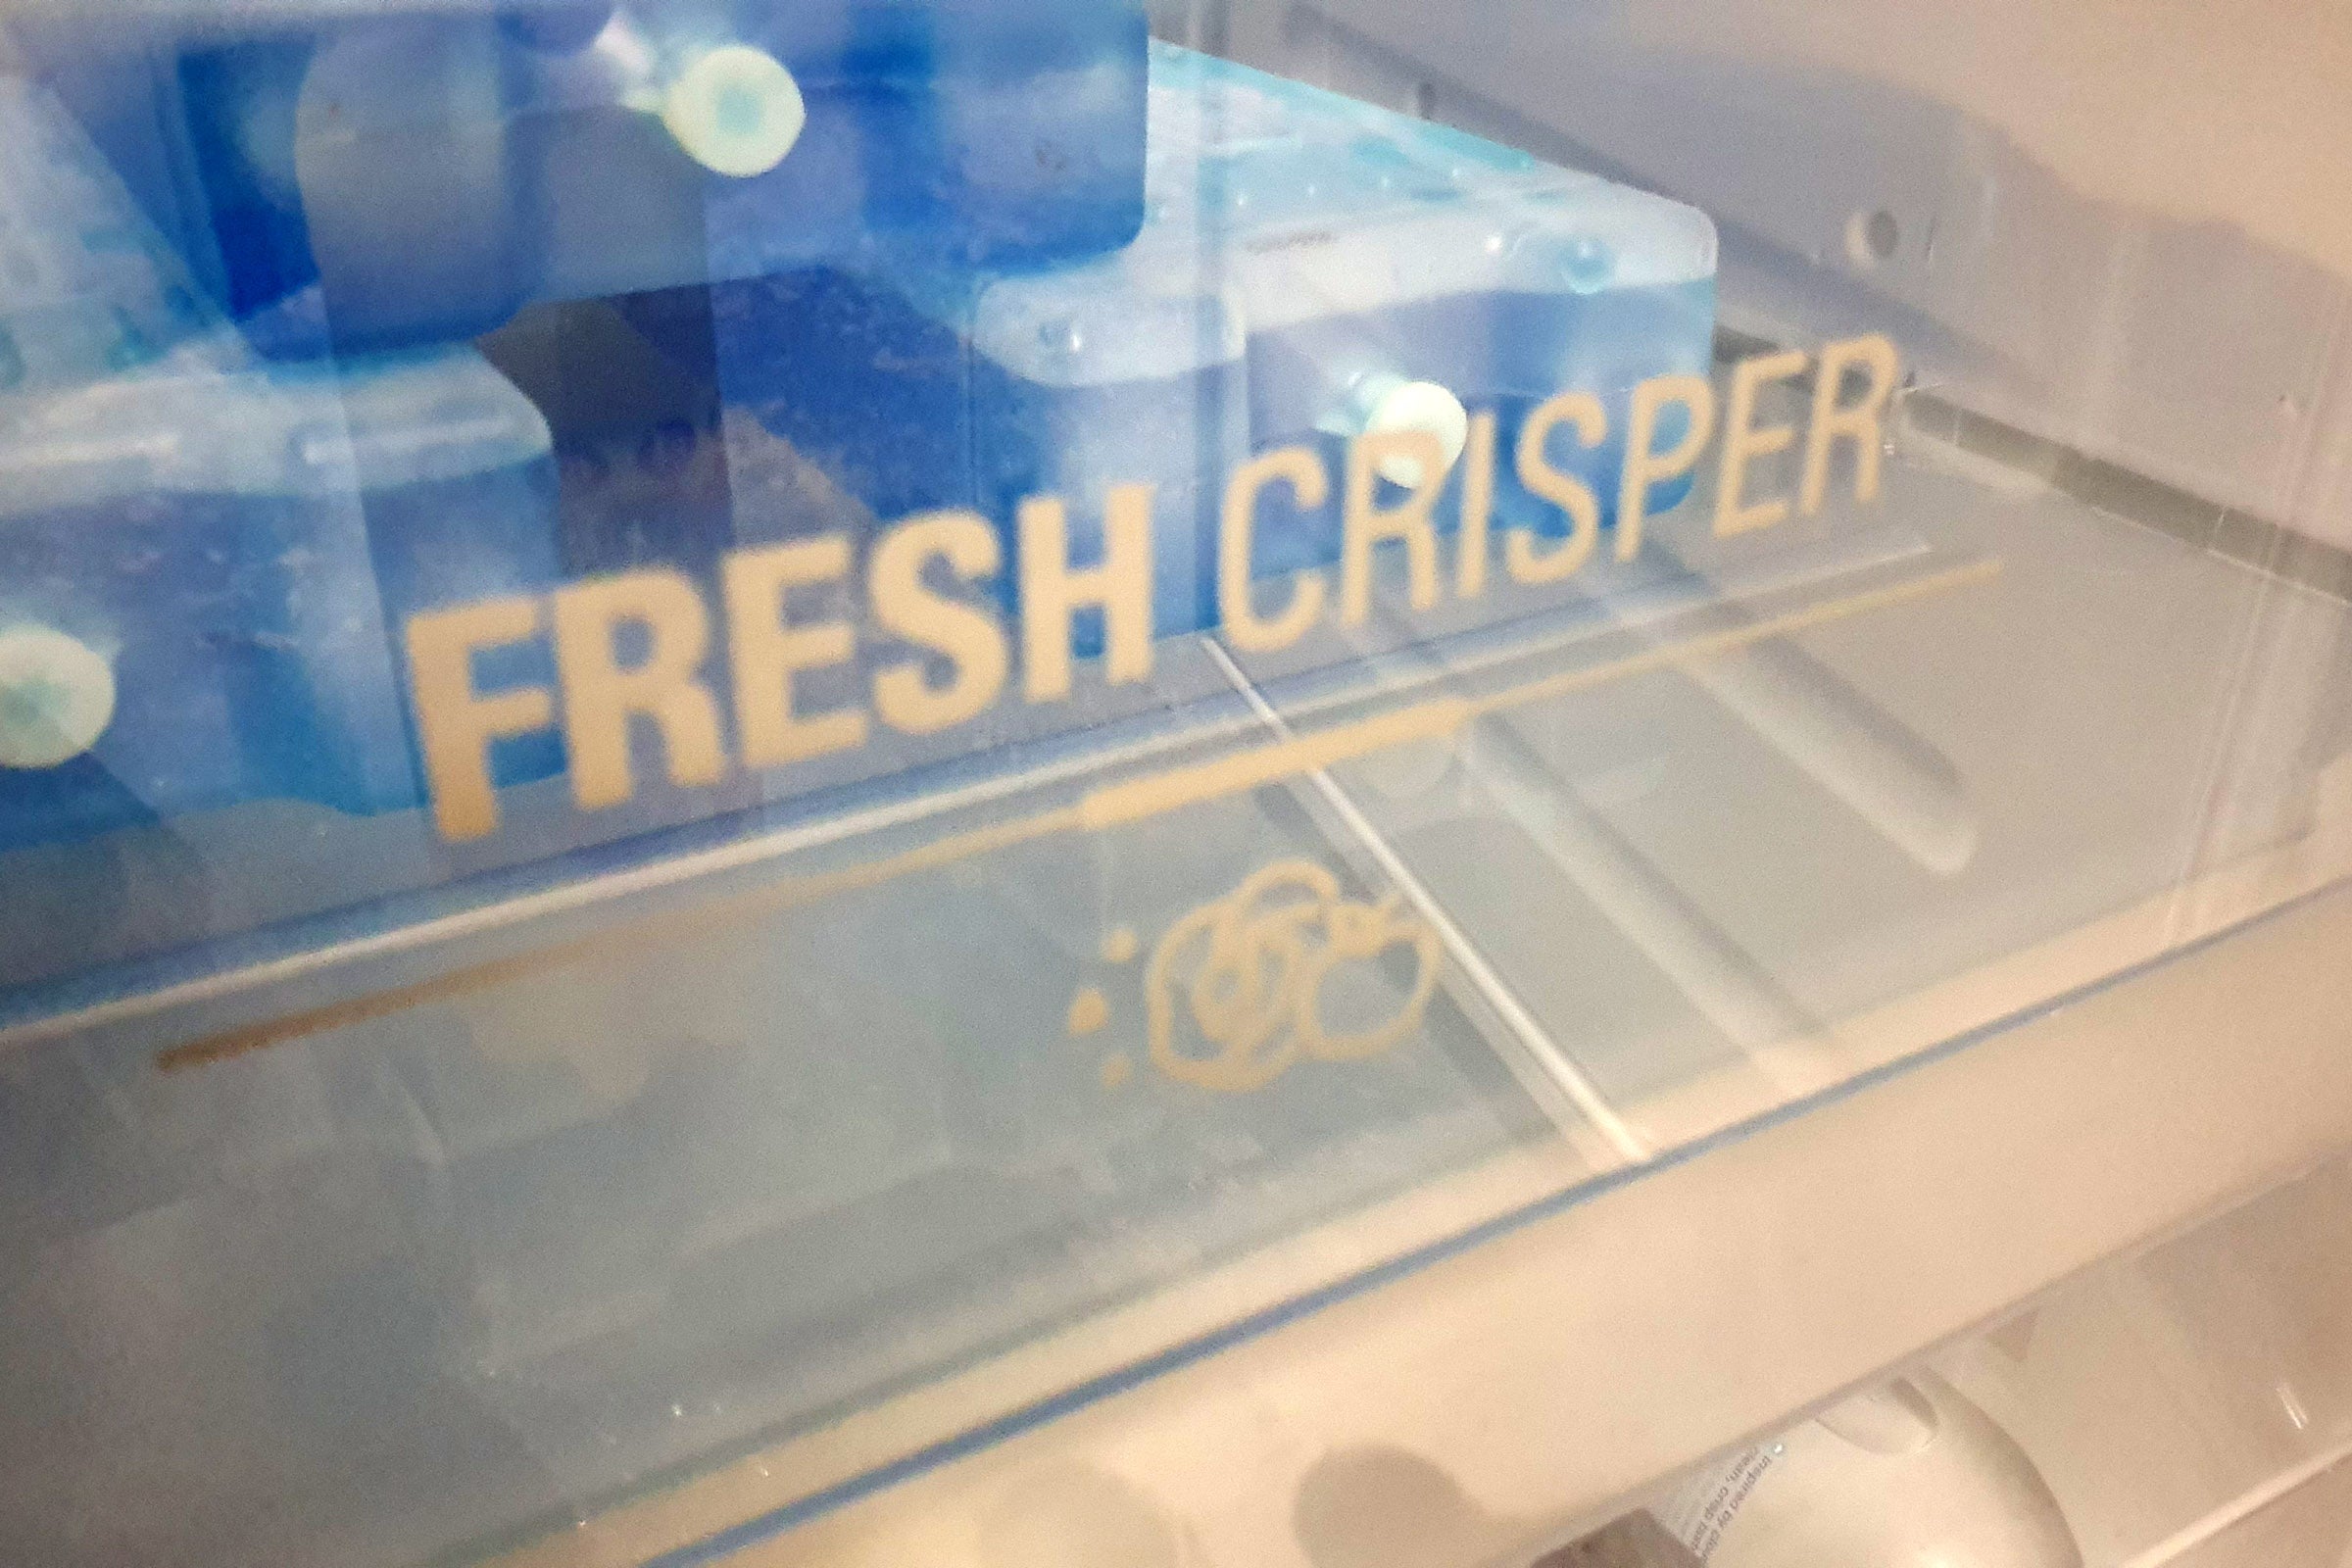 Close up view of a container with fresh crisper printed on it